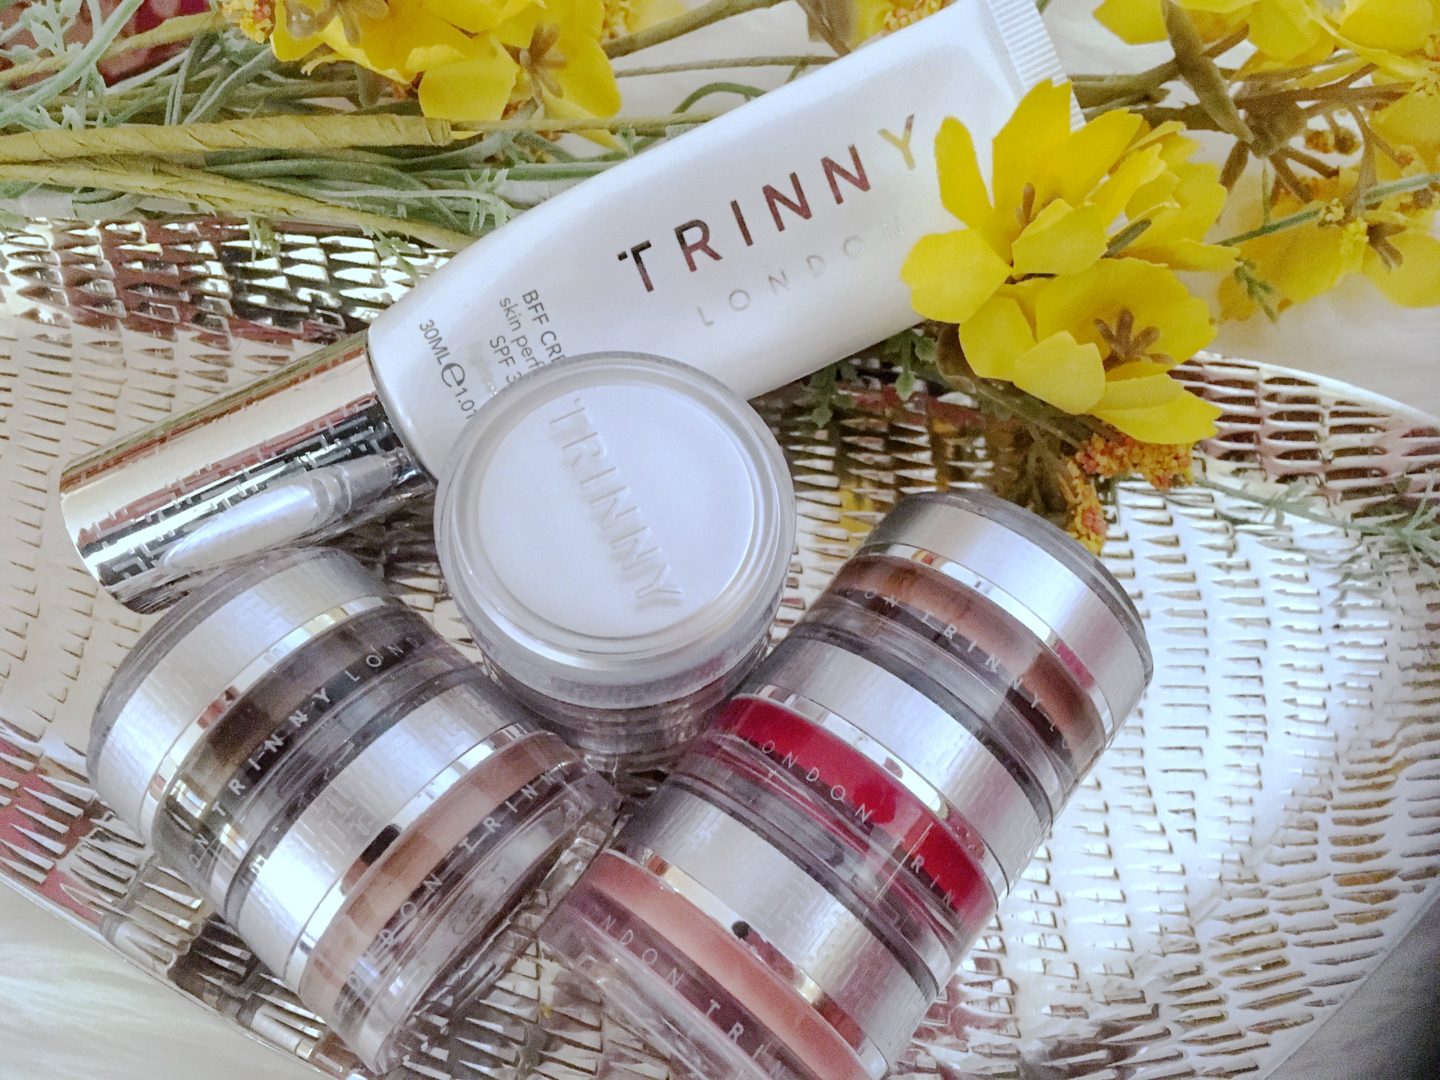 trinny london products